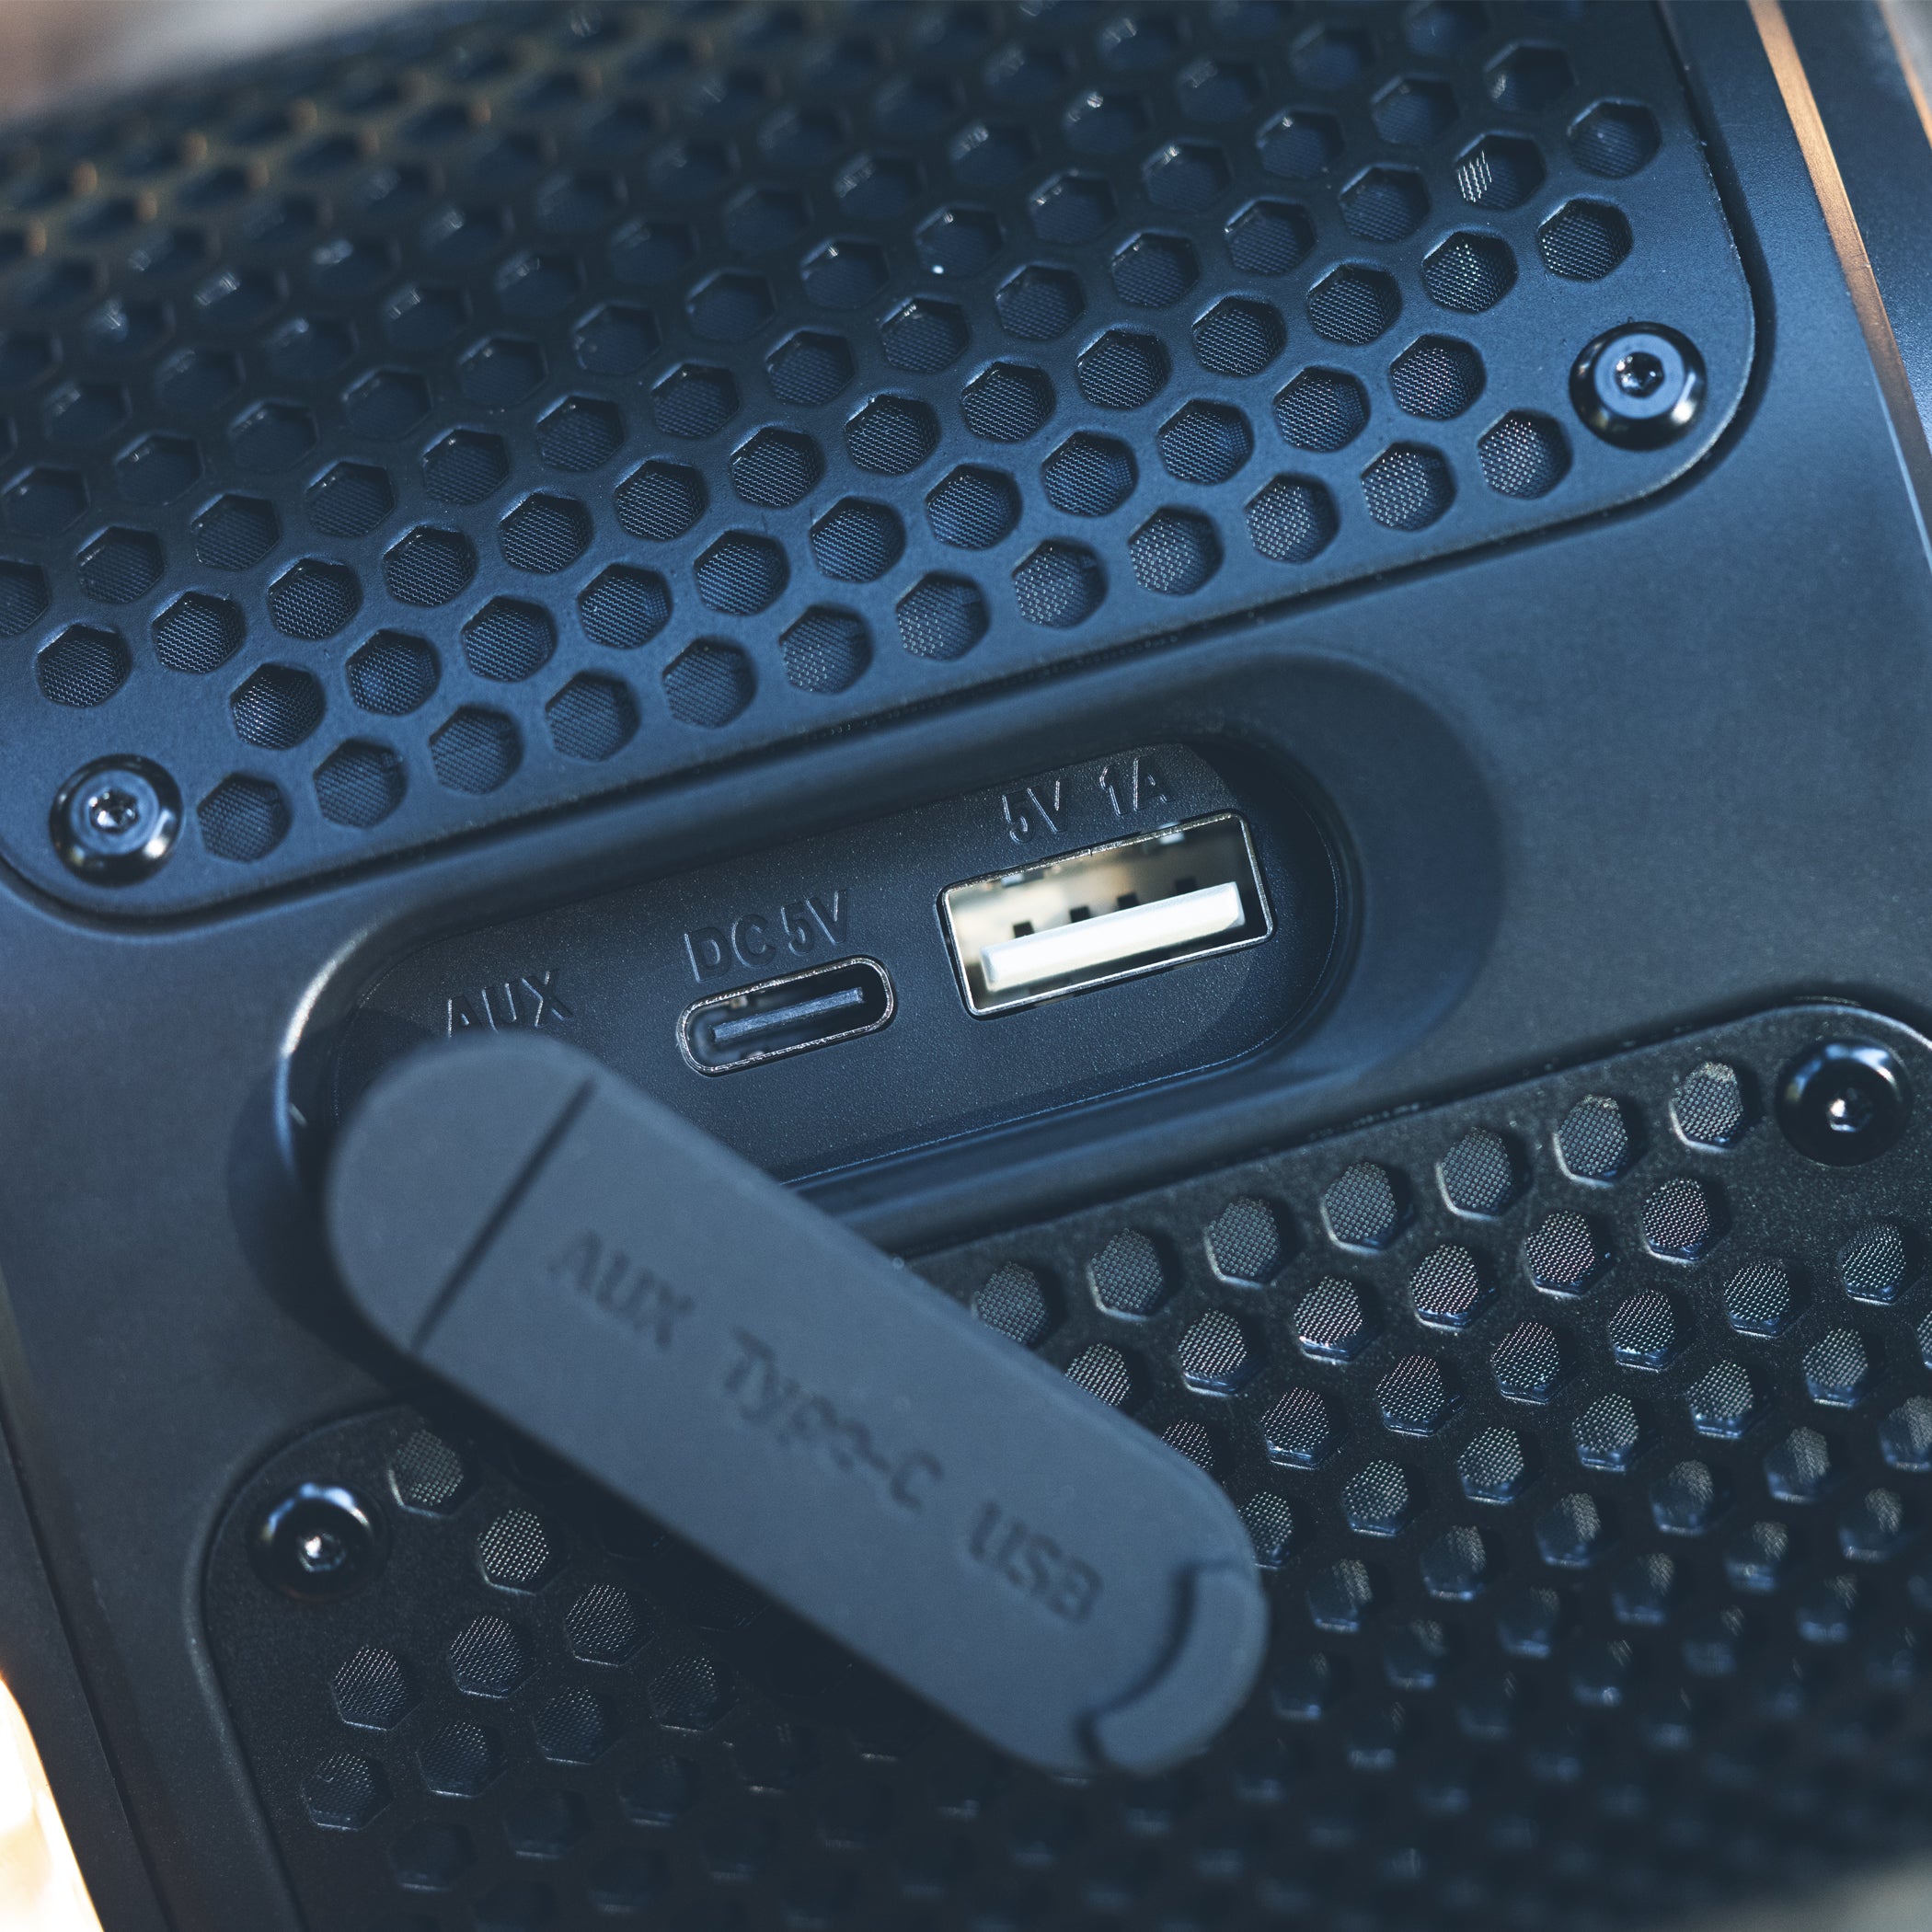 Close-up of a portable speaker's back panel showing an auxiliary input, dc 5v port, and a usb port, all set within a black honeycomb grille texture.